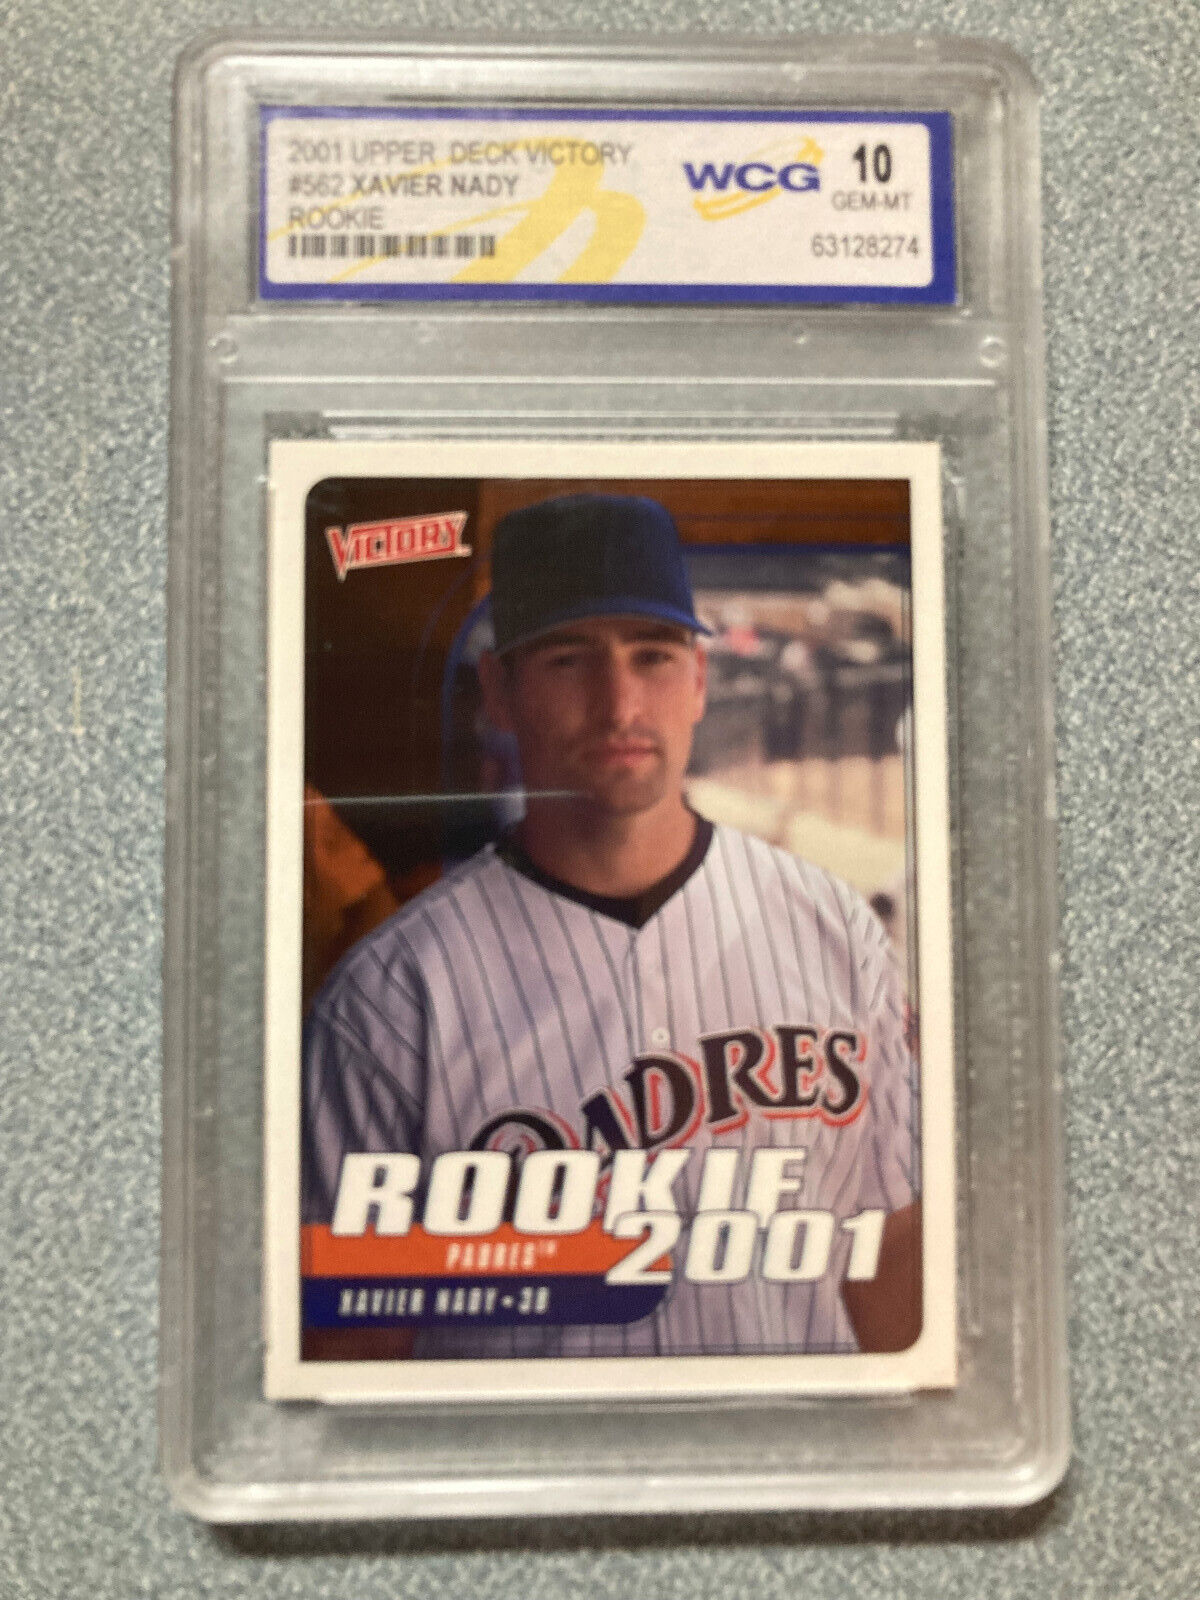 2001 Upper Deck Victory Xavier Nady 562 ROOKIE CARD (RC) WCG 10 GEM MINT Padres . rookie card picture